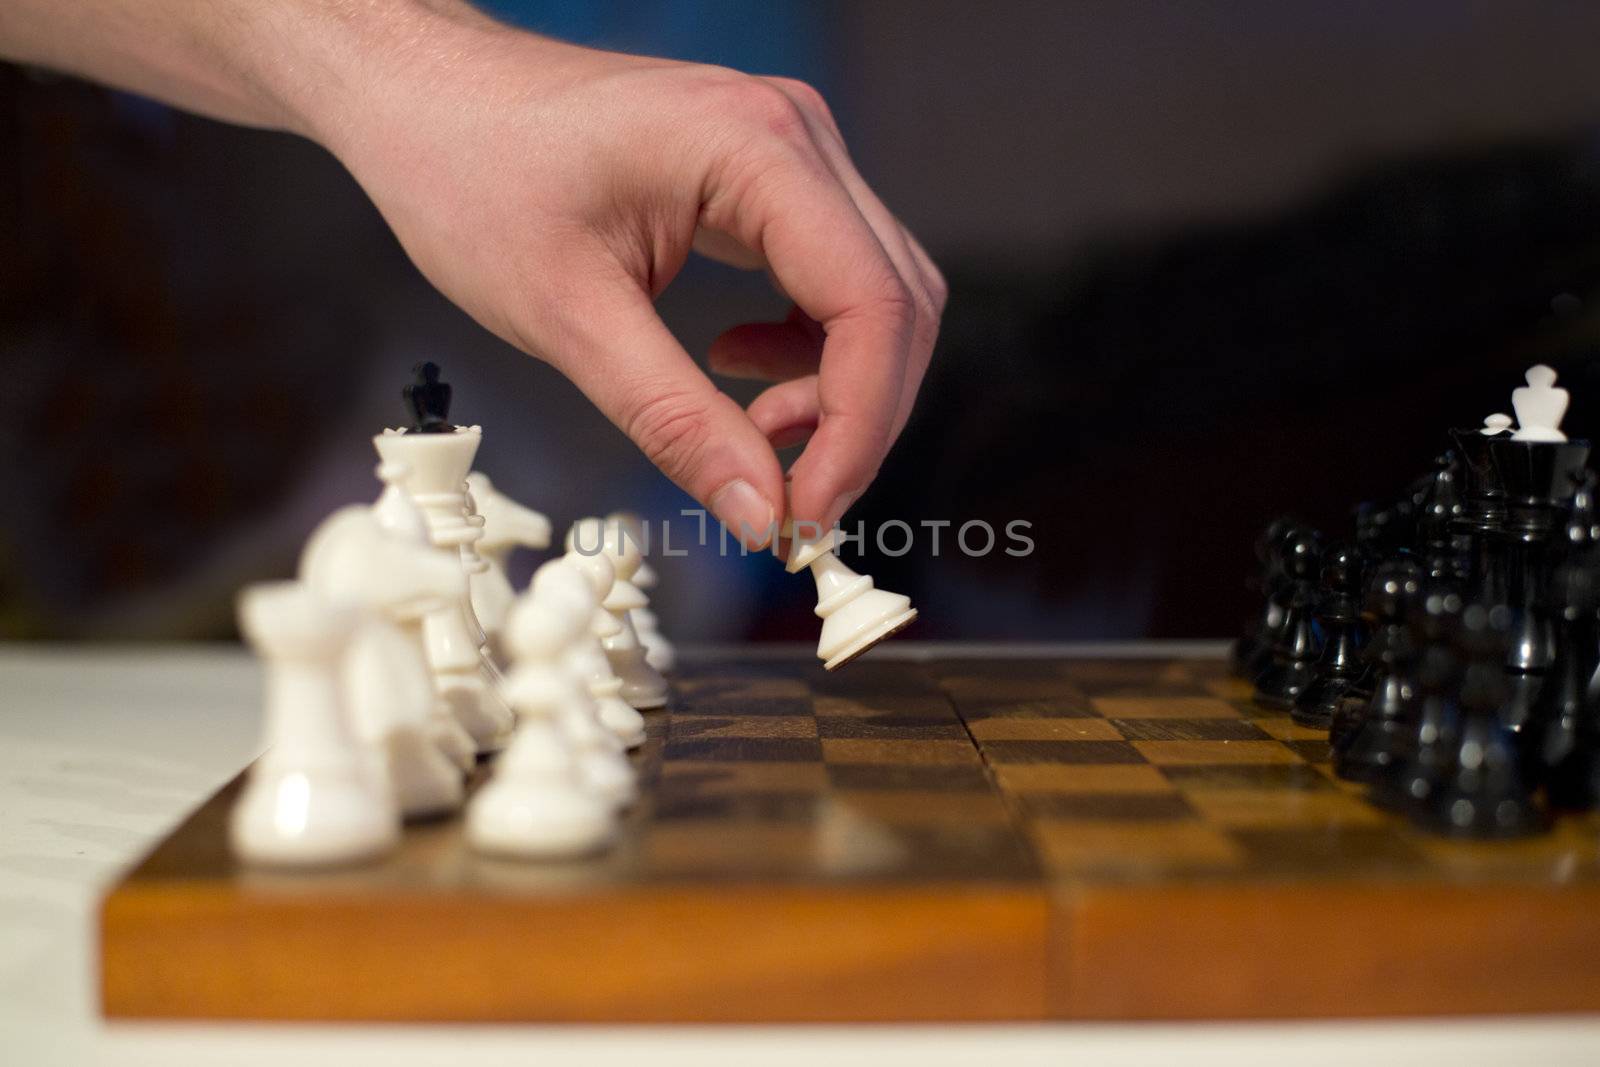 Player make move with white pawn on board